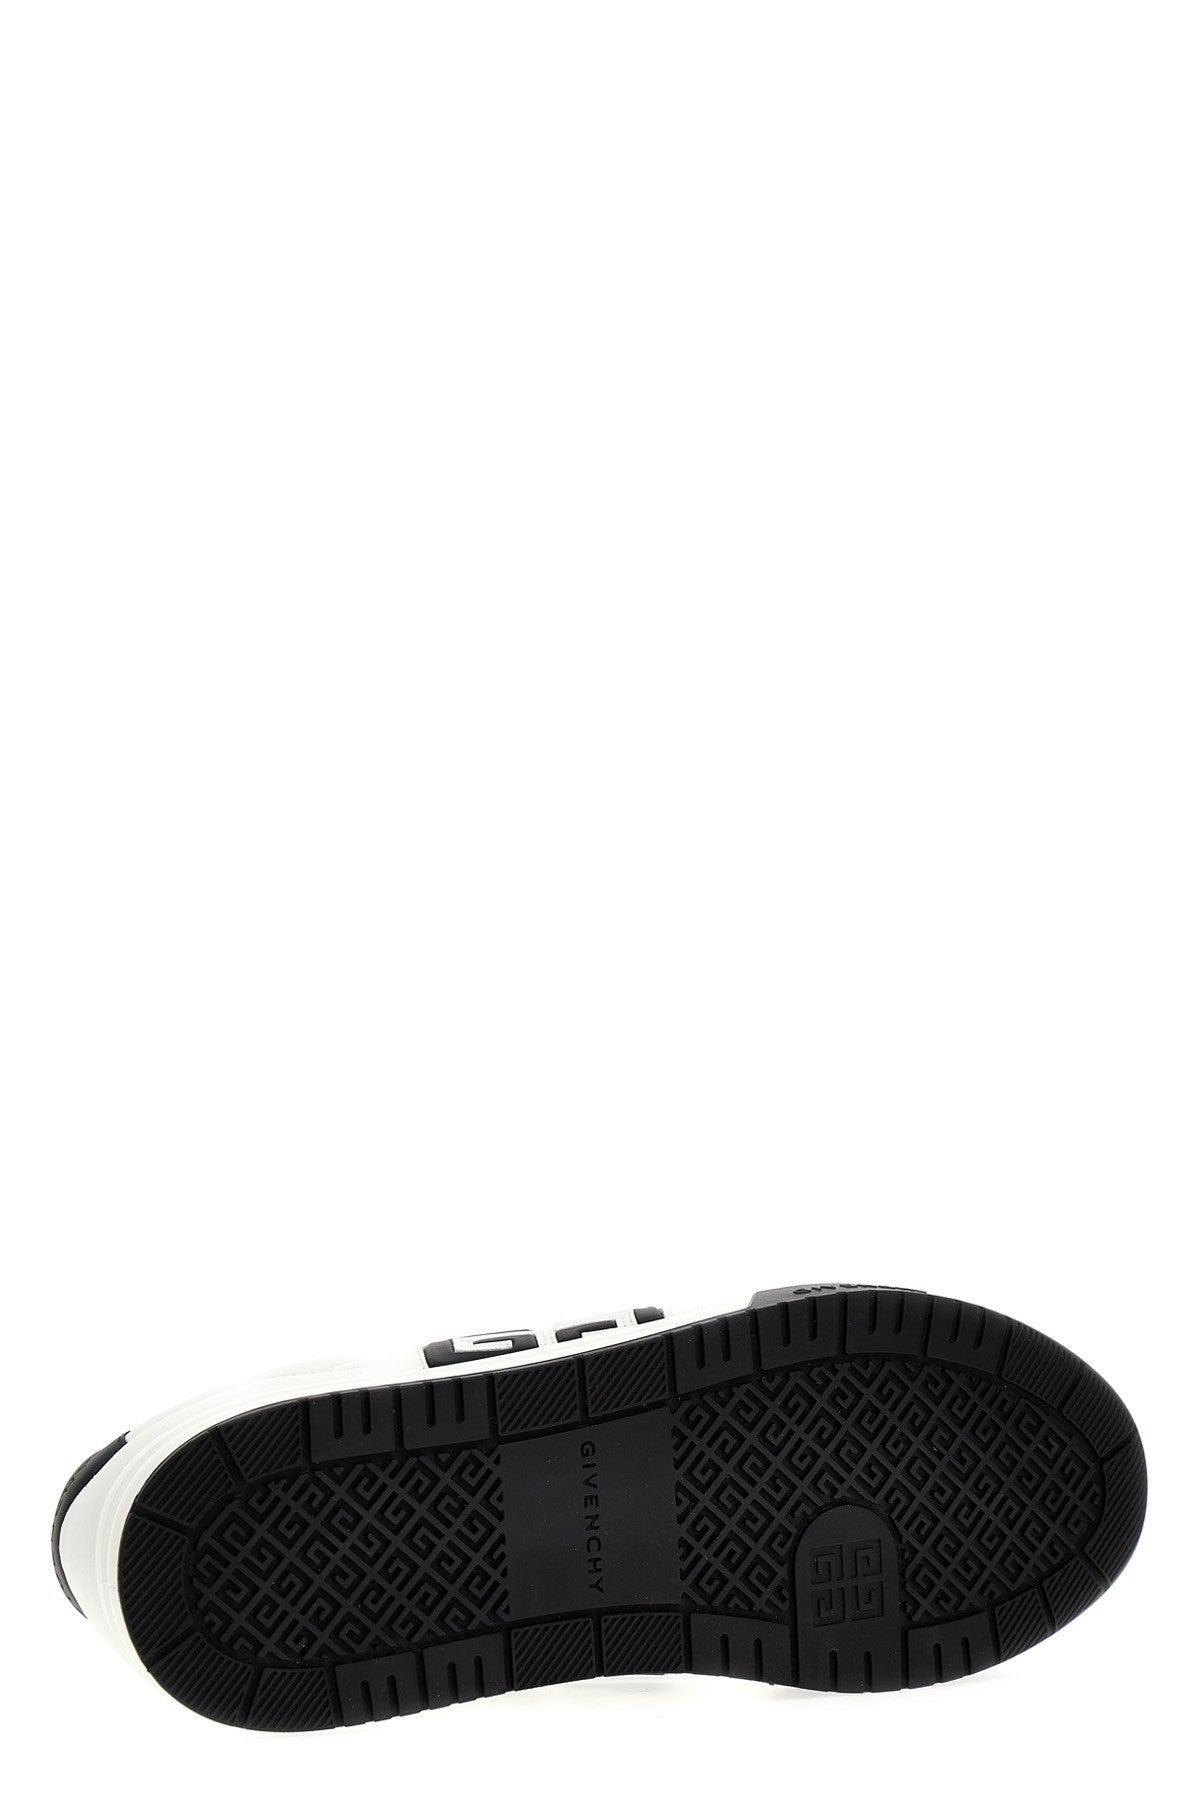 Givenchy Men 'G4' Sneakers - 4